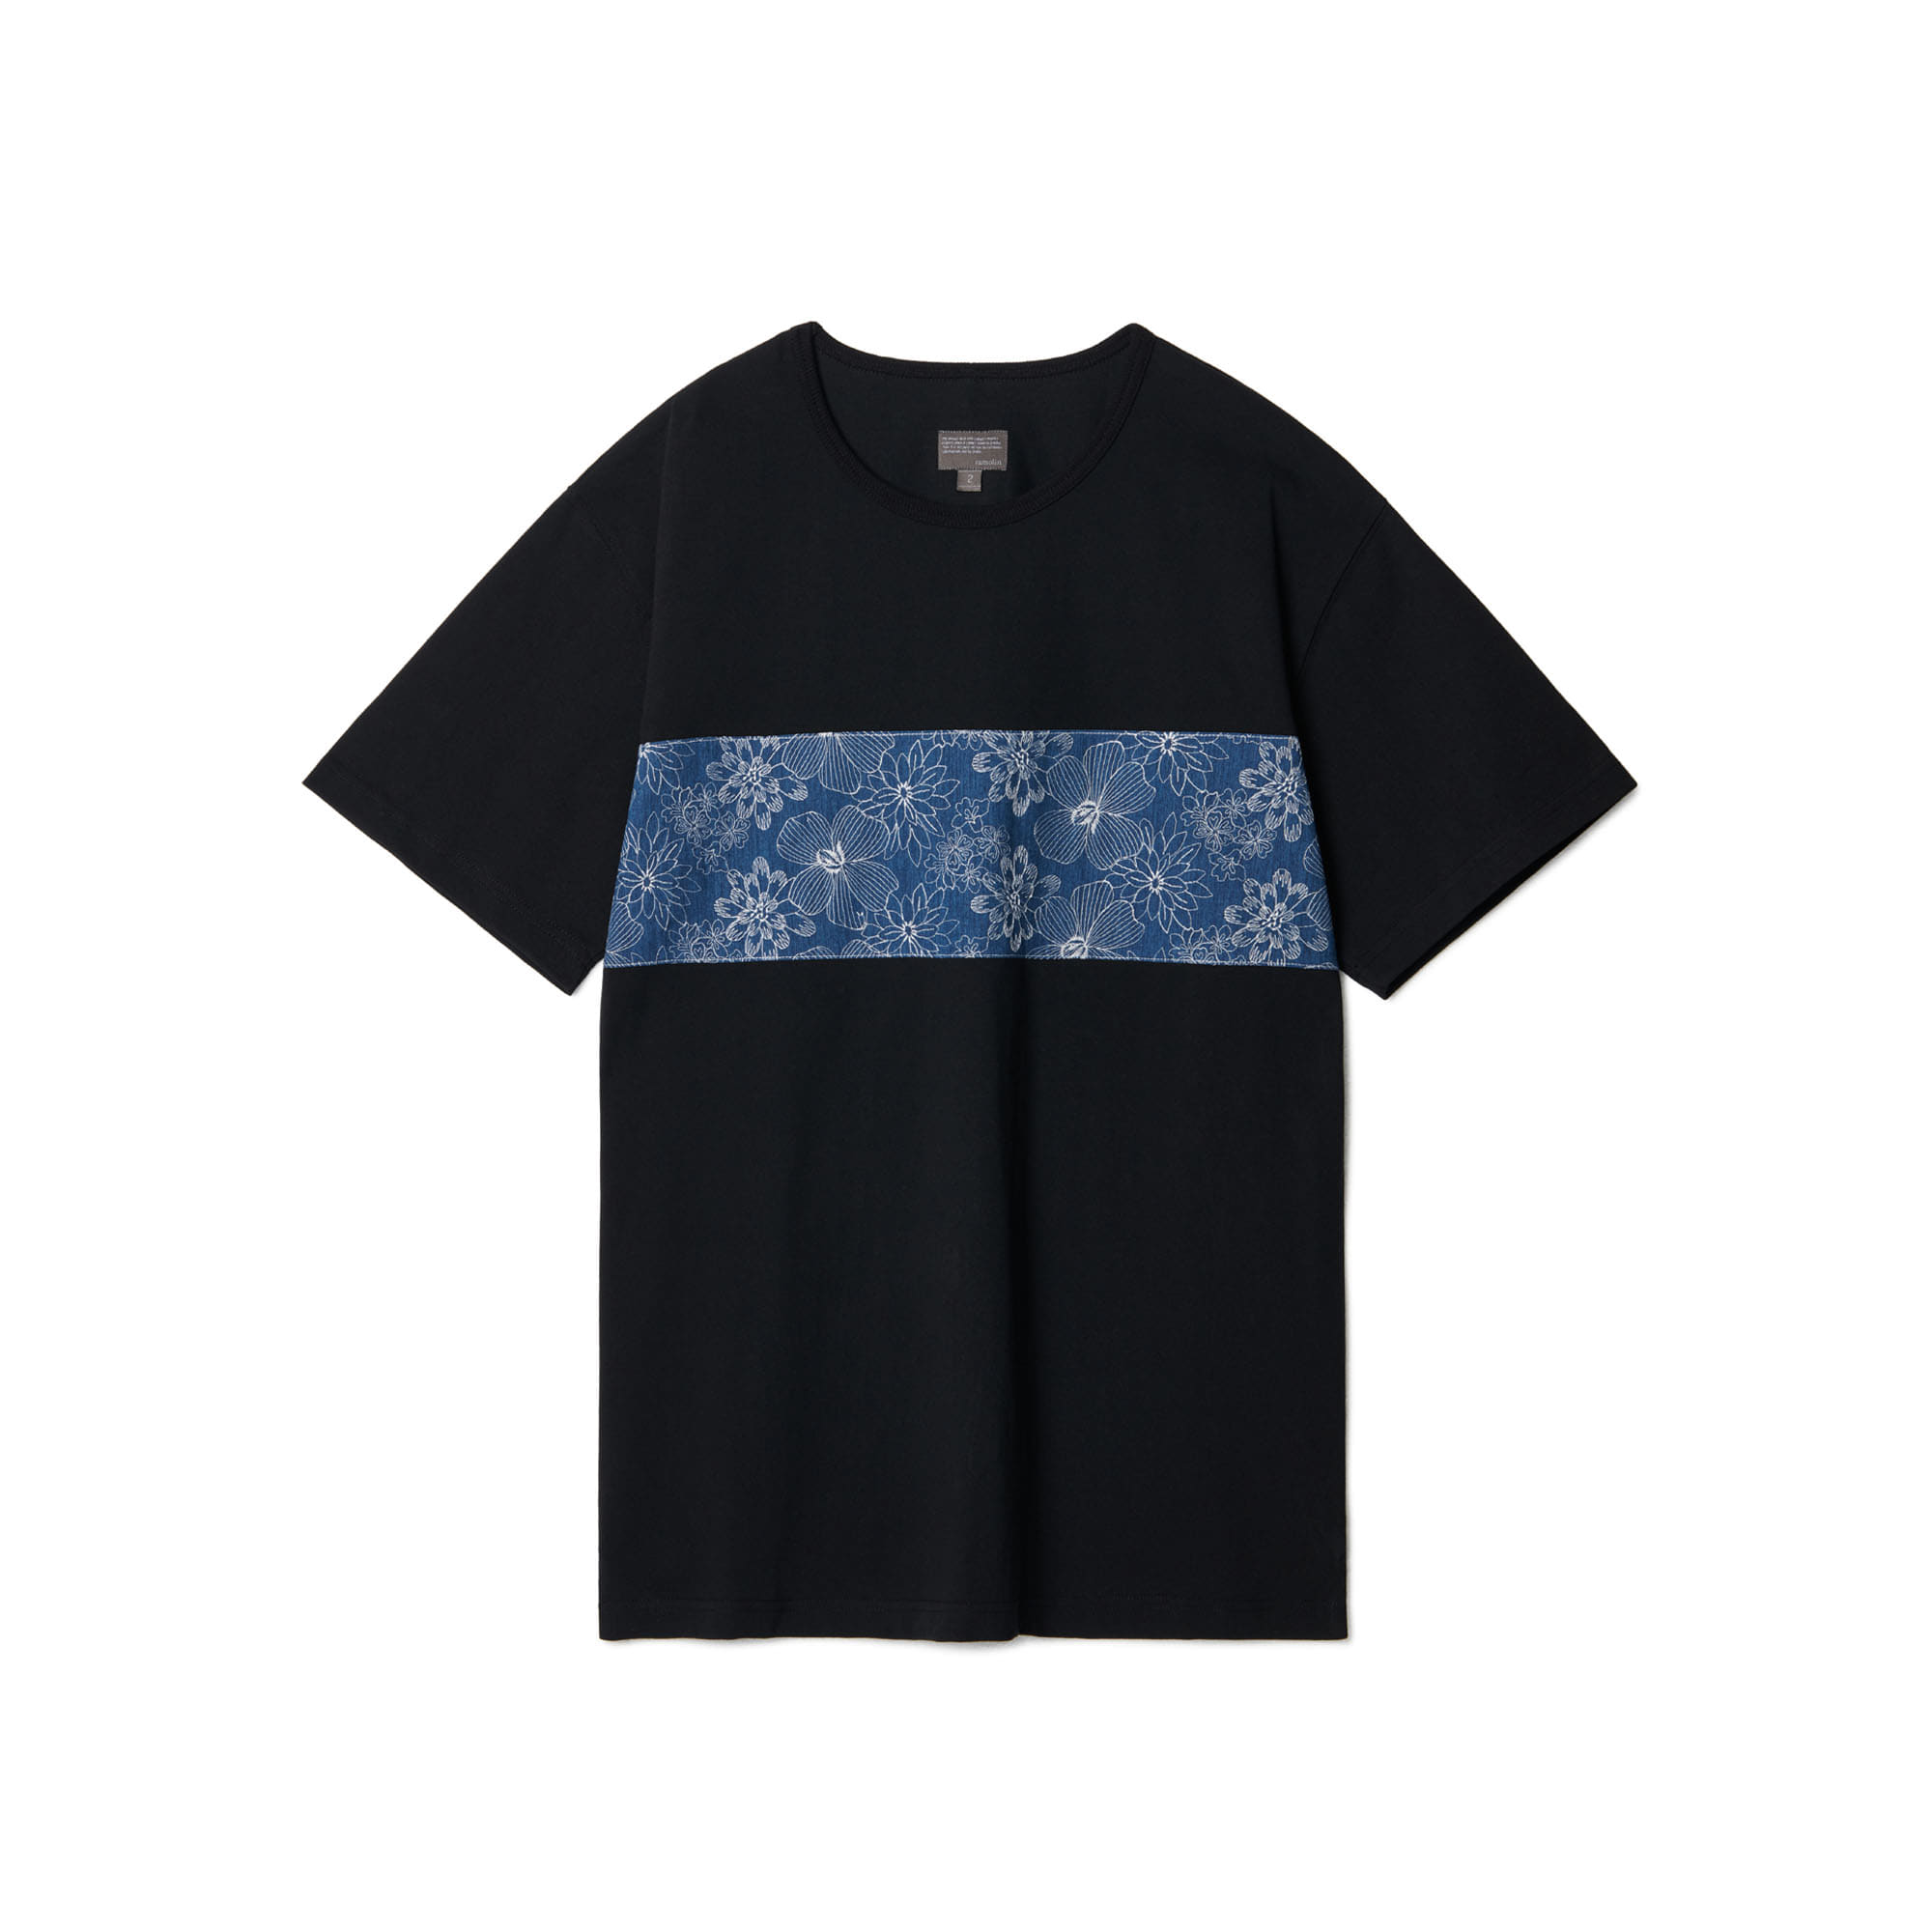 Flower Embroidery Block T-shirts Black